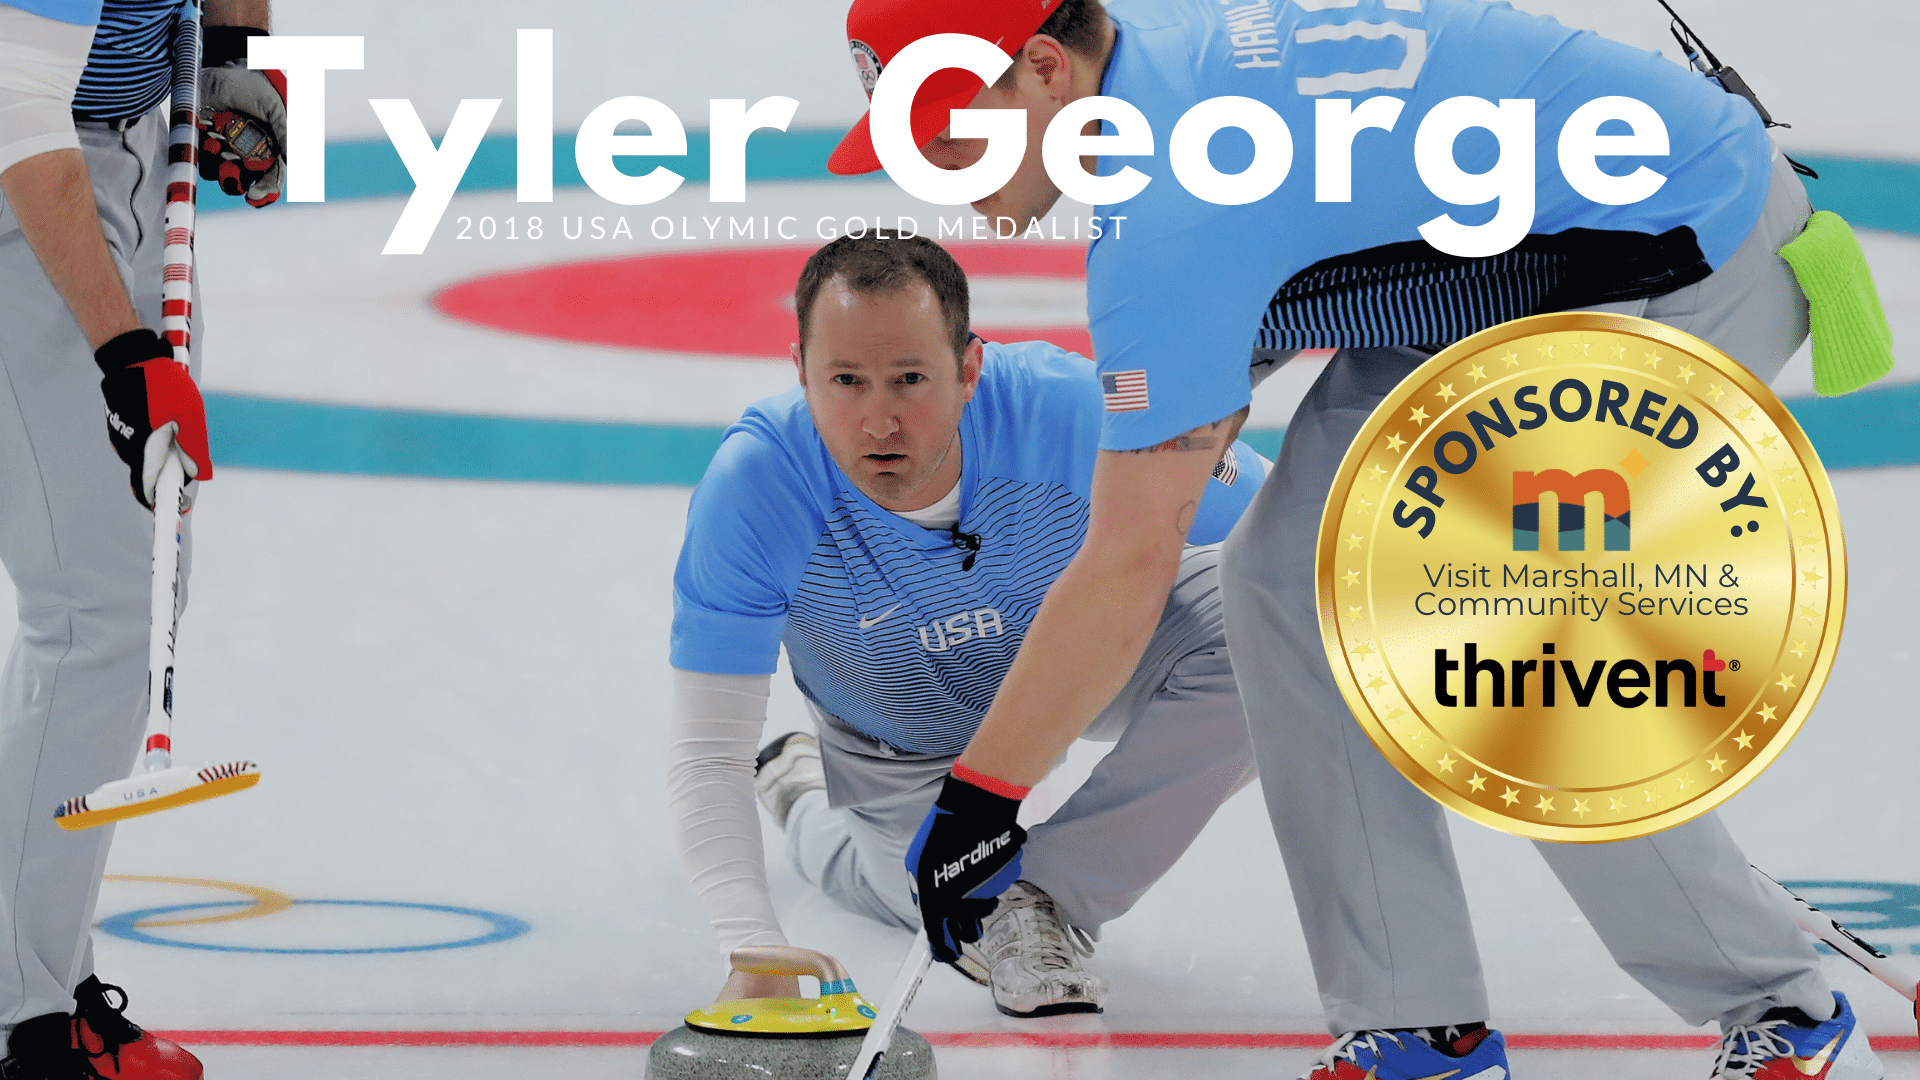 Tyler George Curling Event Facebook Cover